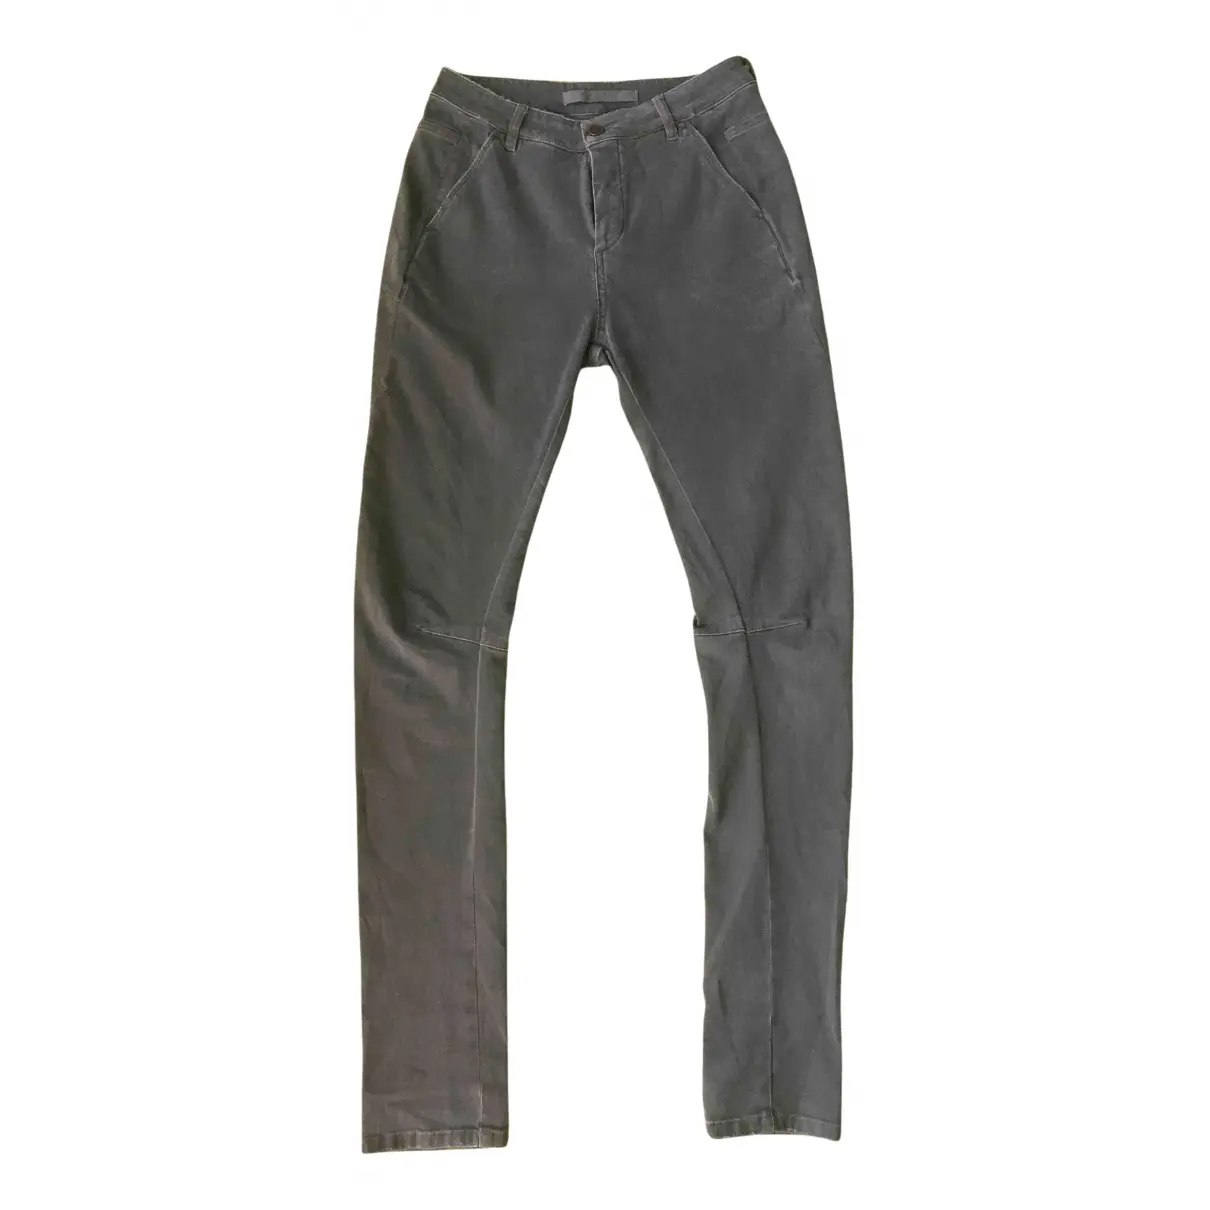 Trousers Superfine